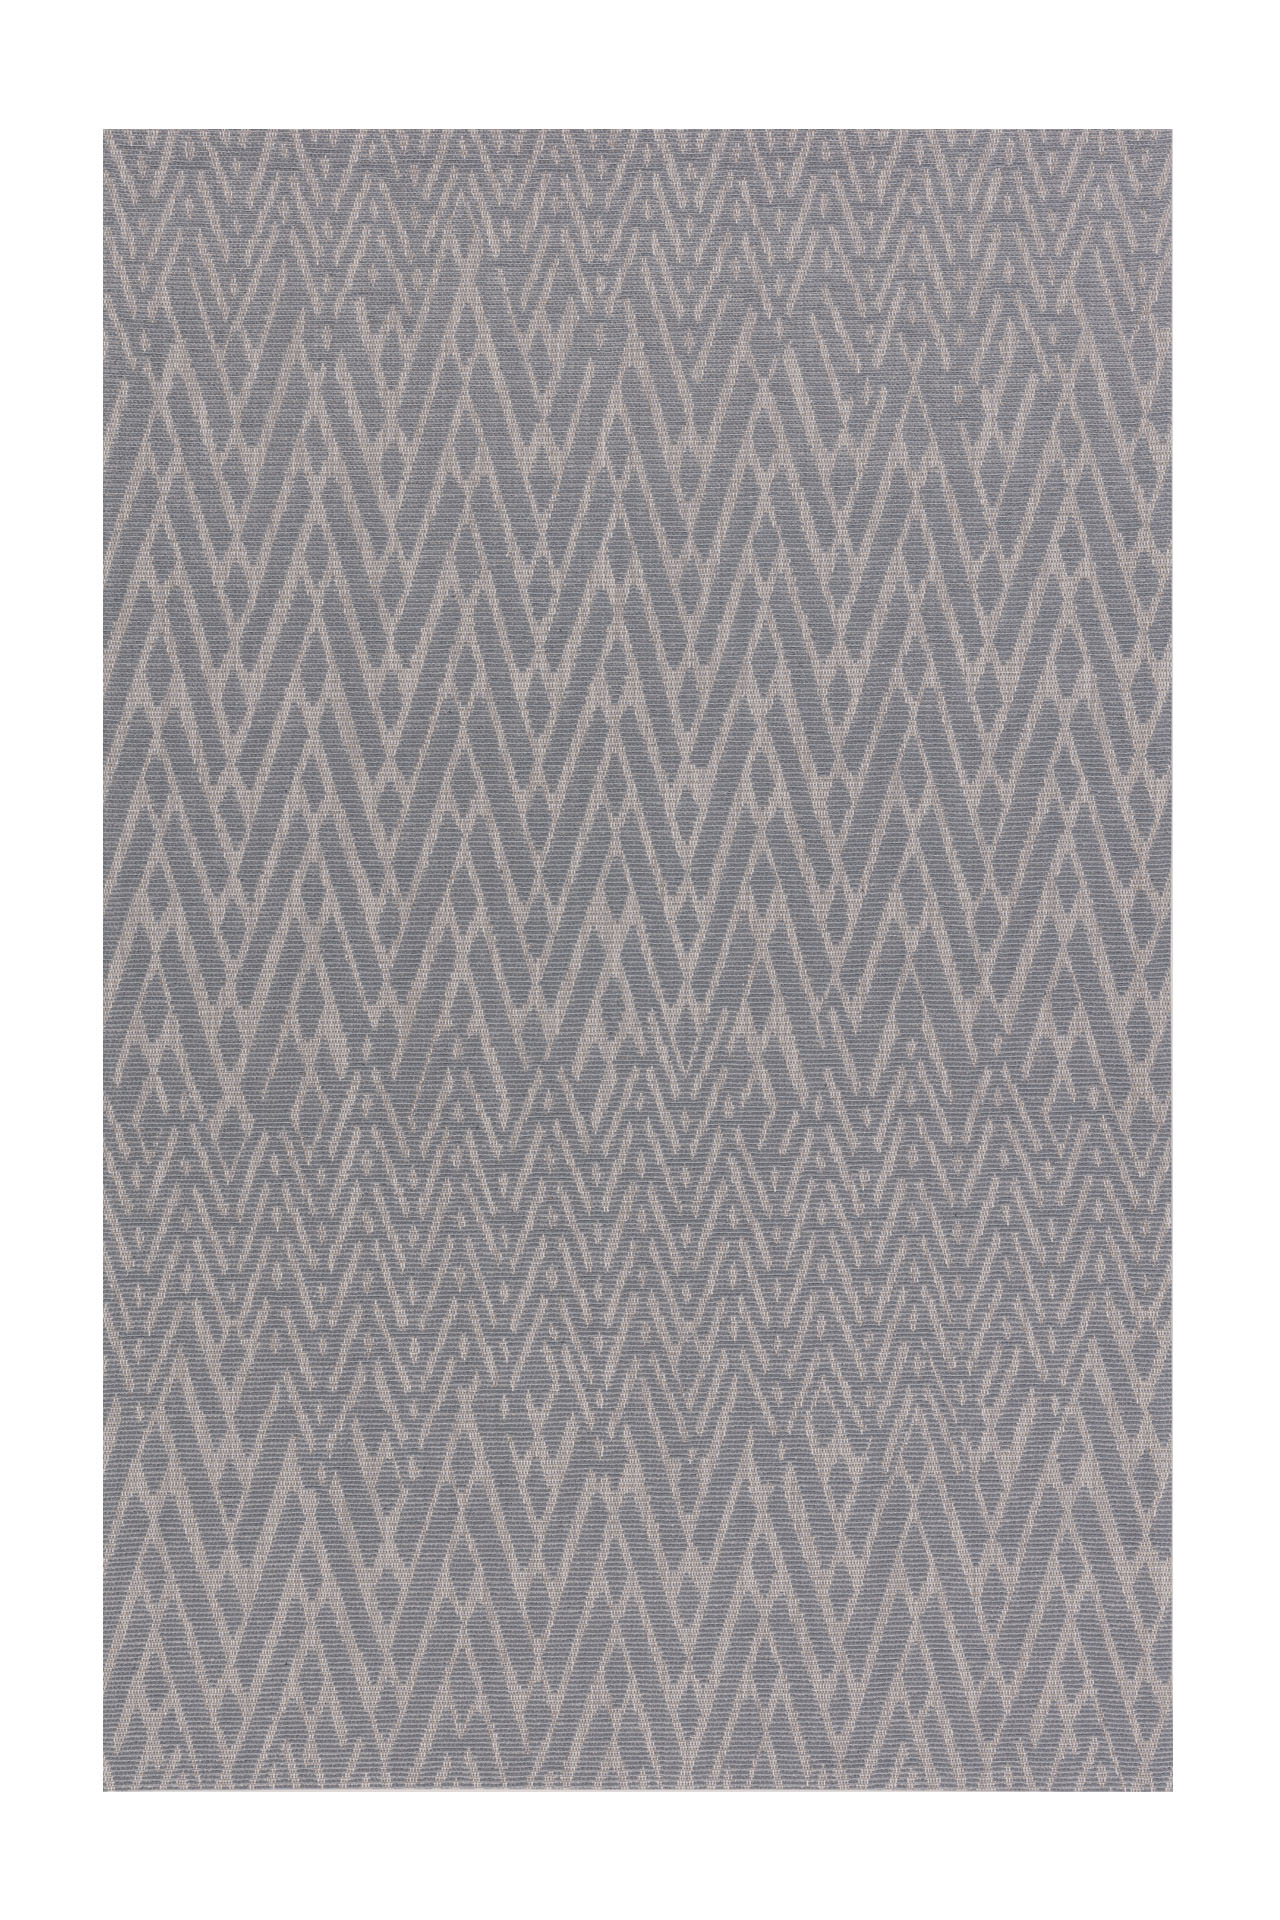 Masai - Bespoke rug collection | Limited Edition | Limited Edition